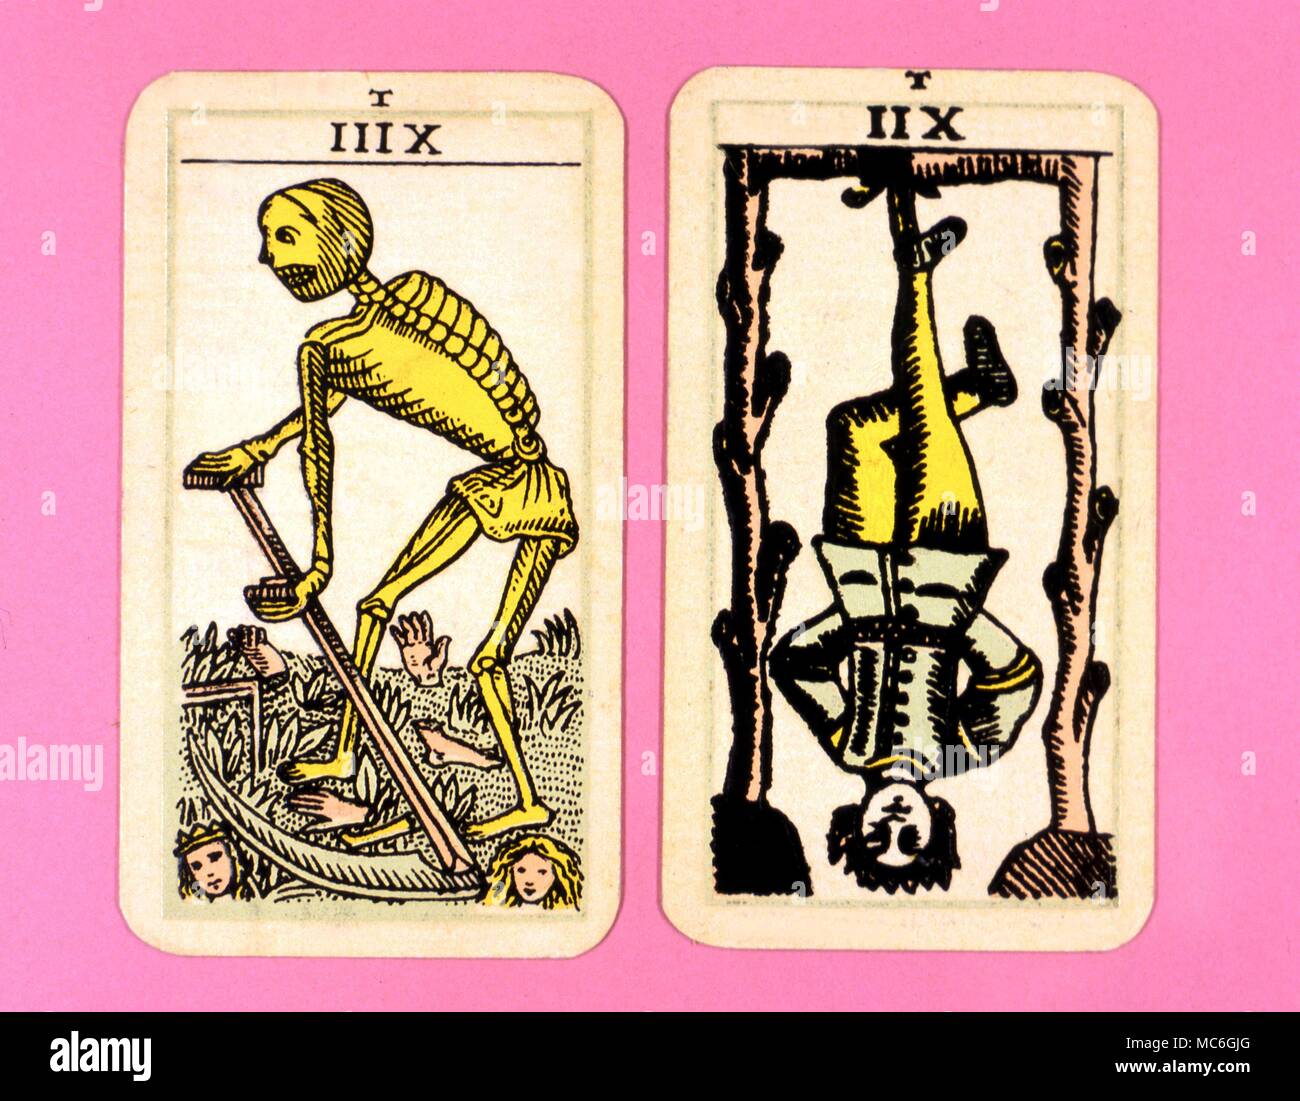 Tarot Cards-Majo Arcana- The Parisian Tarot. Card 12. The Hanging Man and Card 13. The Death Card. Two cards from a Major Arcana picture Tarot, probably designed in an archaizing style in loose imitation of the Rosicrucian deck designed by Pamela Coleman Smith, alongside A.E.Waite, and various earlier decks, such as that published by Encausse (Papus) in The Tarot of the Bohemians at the end of the 19th century, post 1905, but earlier than 1912. The name Parisian Tarot was given by the owner of the deck - it might however be called the Tau Tarot, from the intriguing letter Tau at the head of e Stock Photo